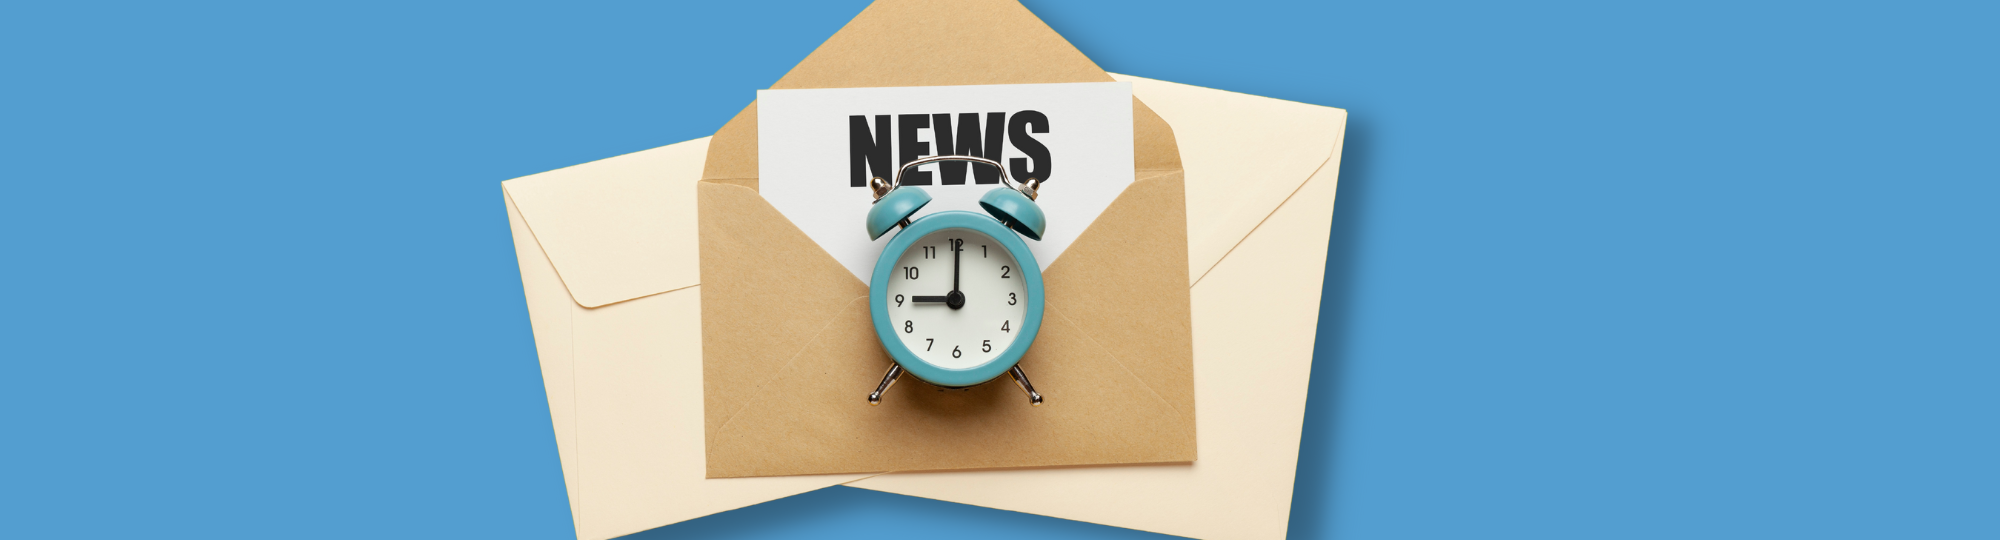 the word news in an envelope over envelopes and a clock